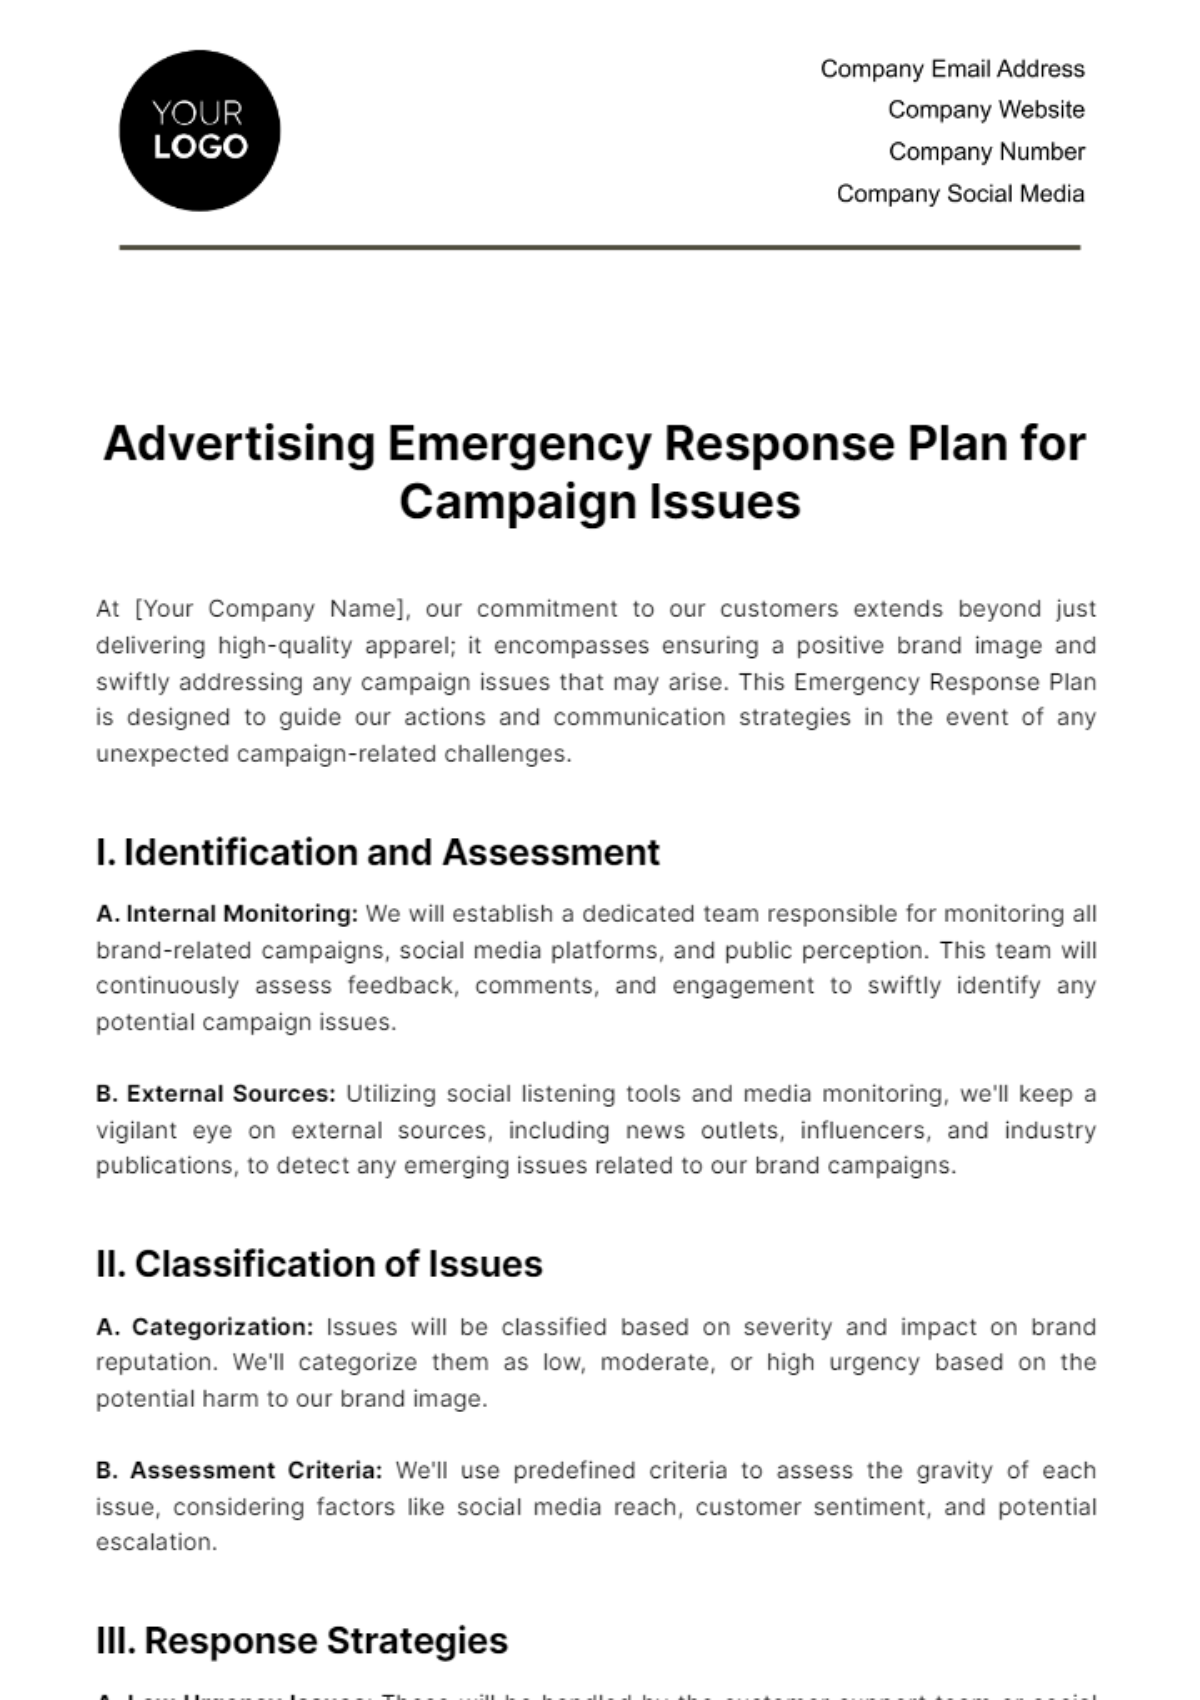 Advertising Emergency Response Plan for Campaign Issues Template